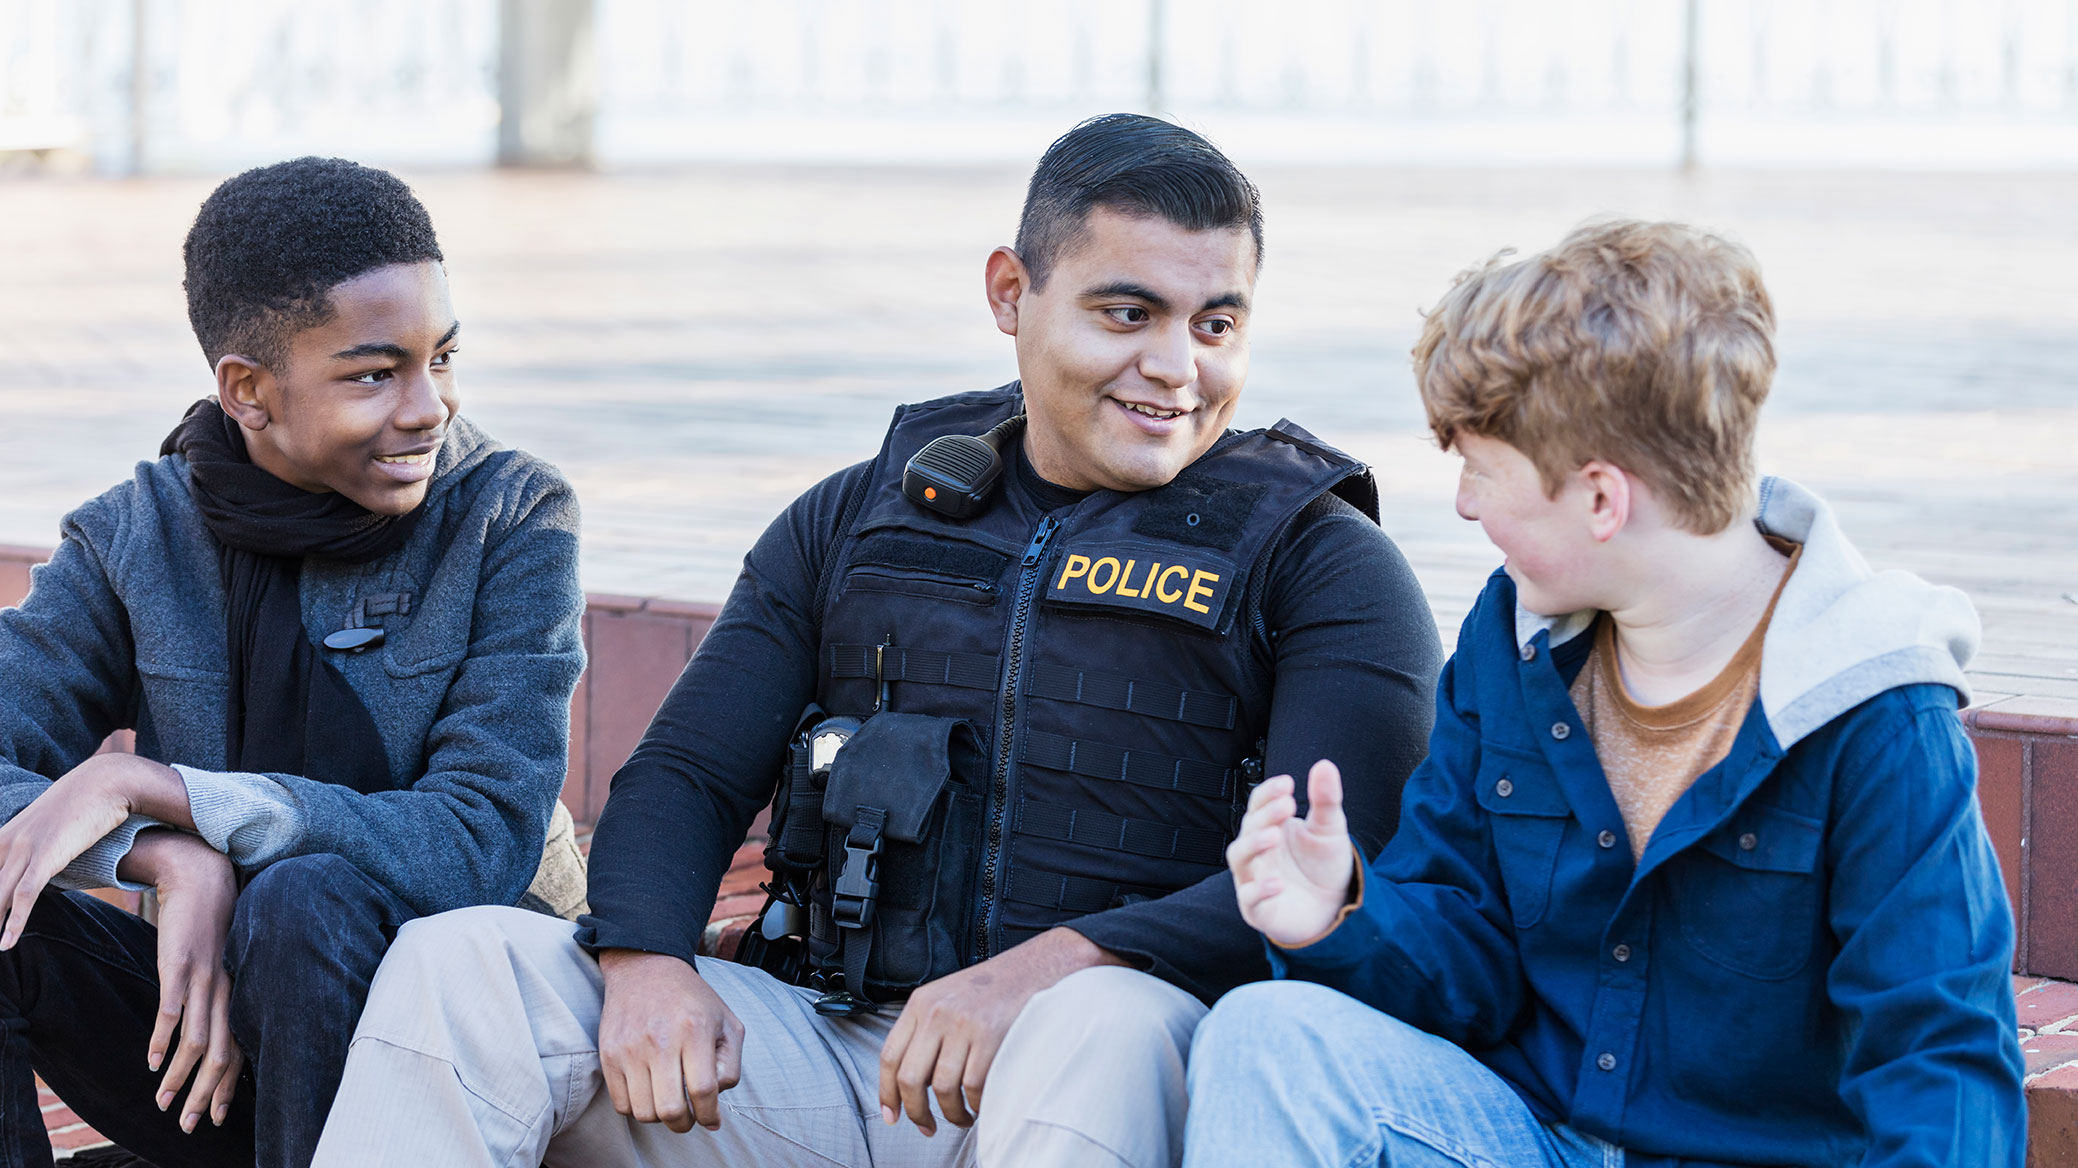 Police officer with teens